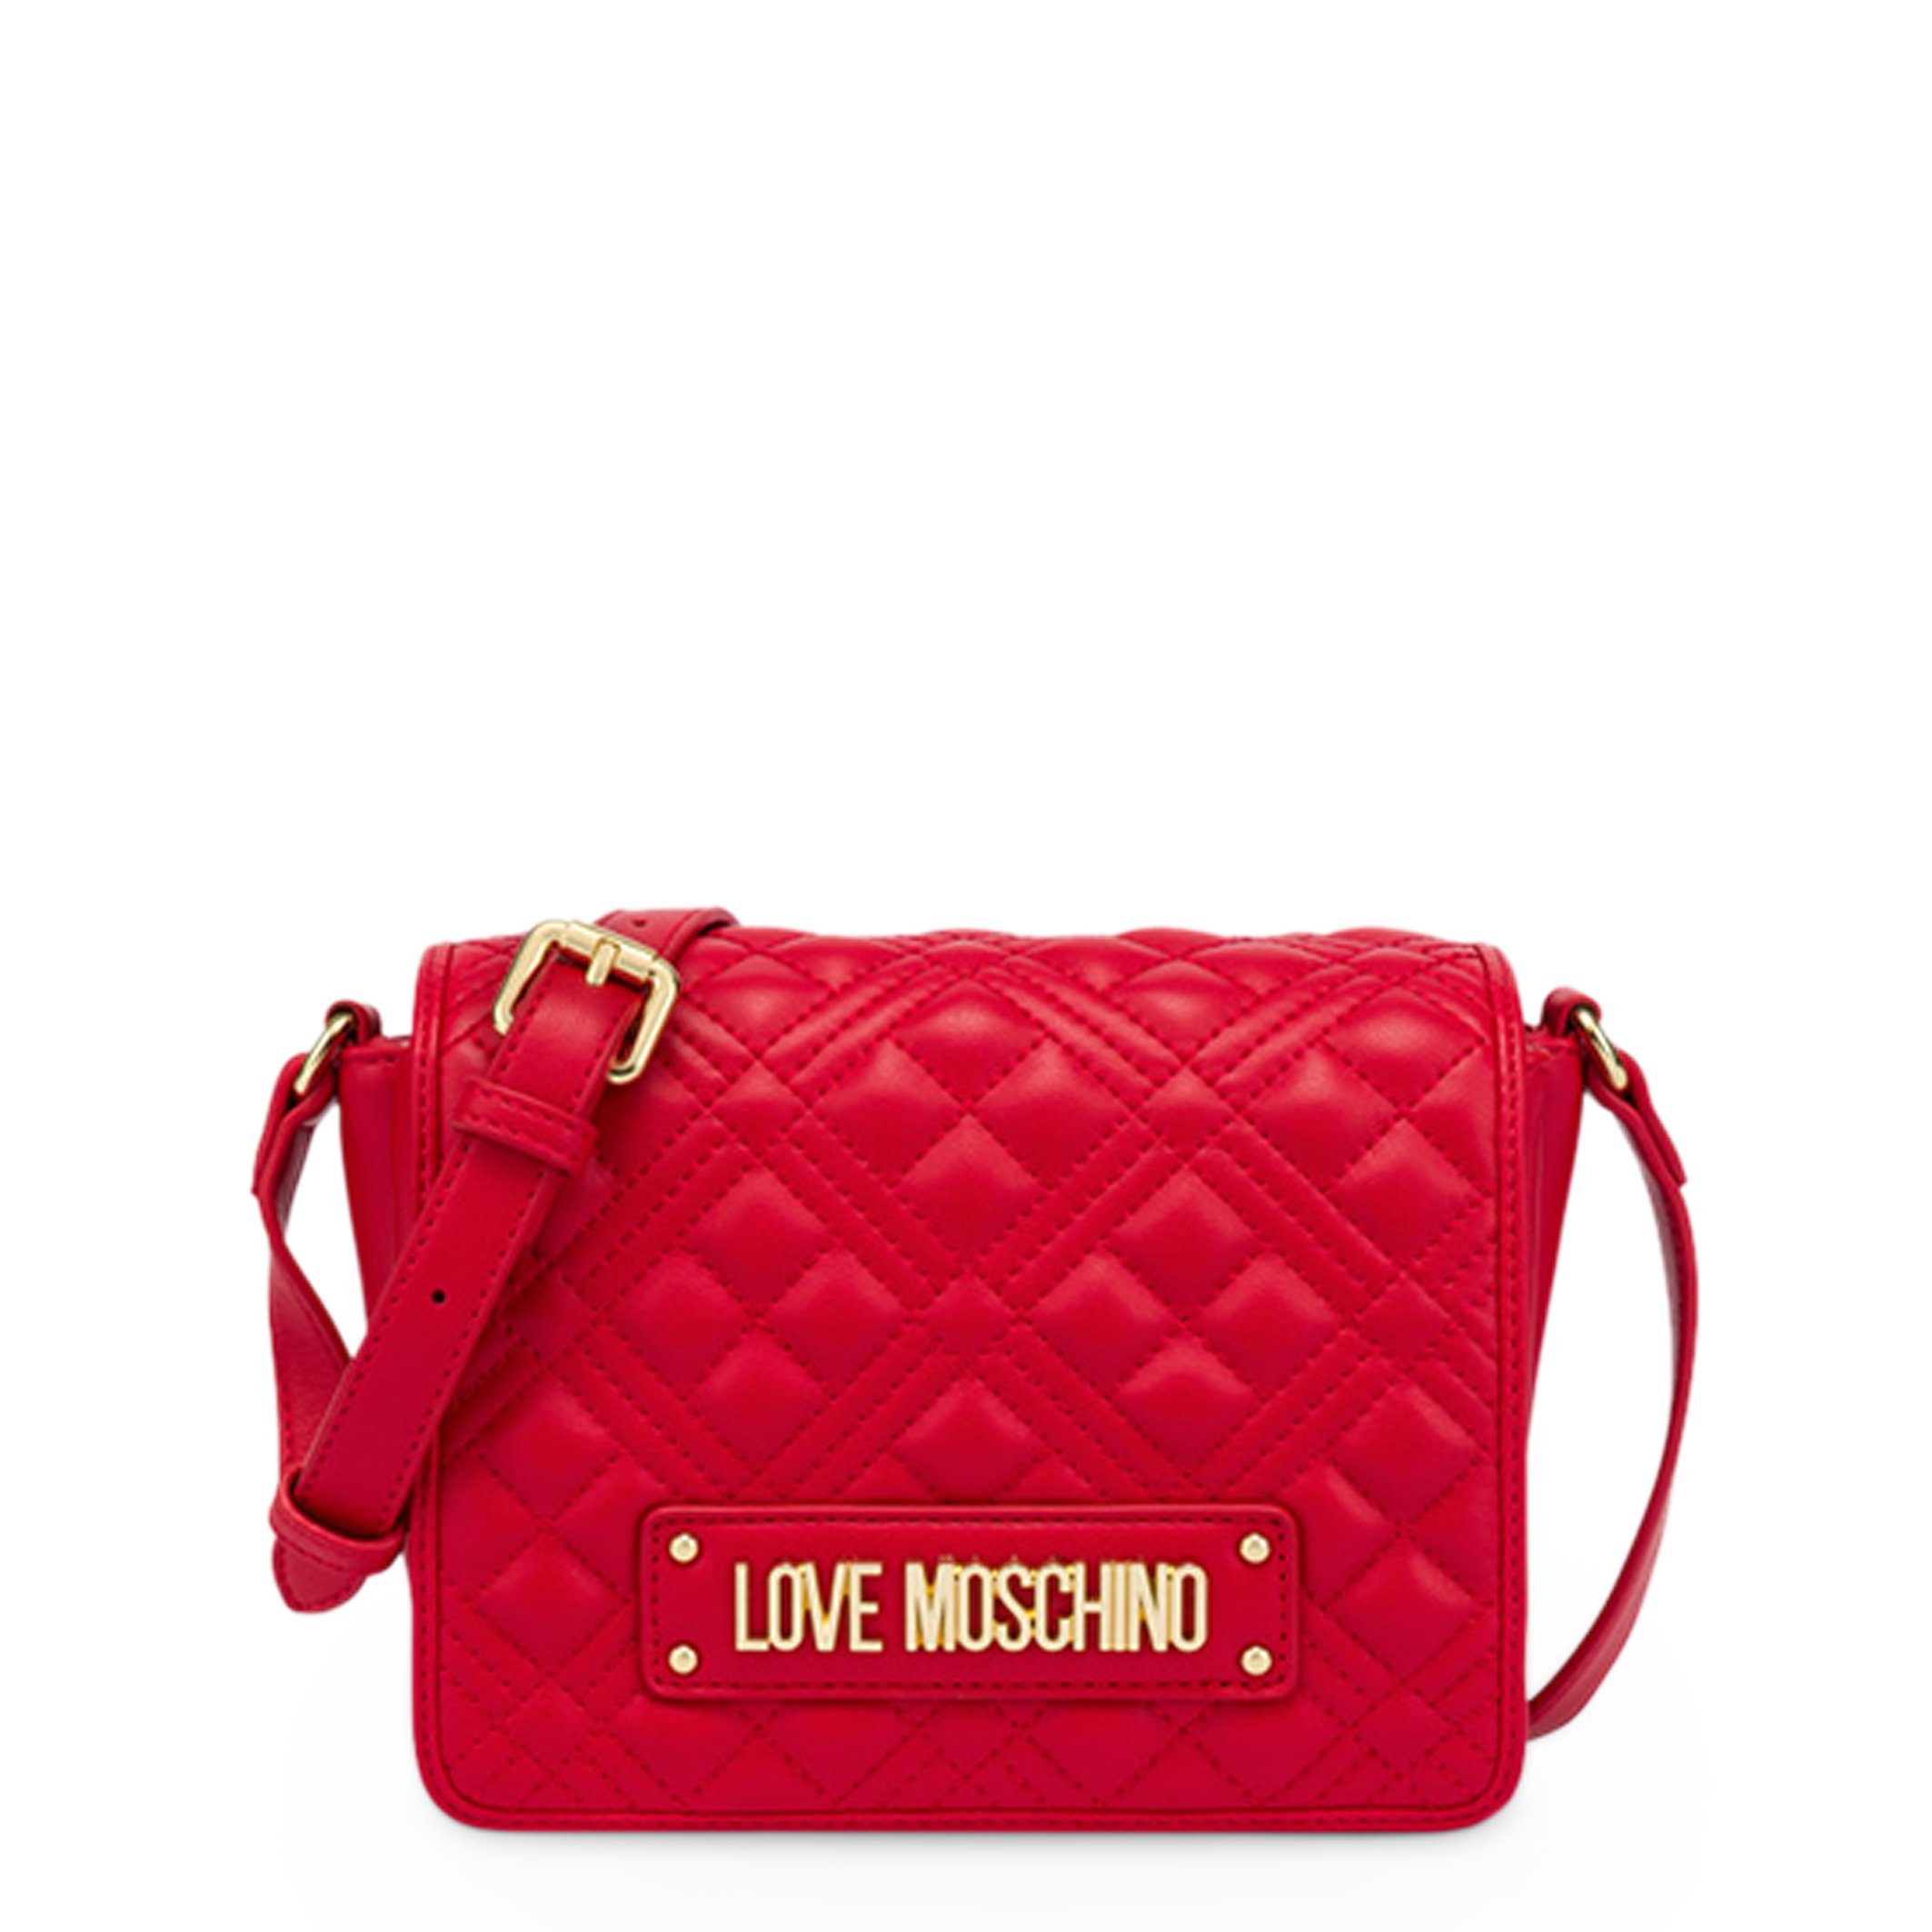 Love Moschino Women's Crossbody Bag Various Colours JC4002PP1DLA0 - red NOSIZE